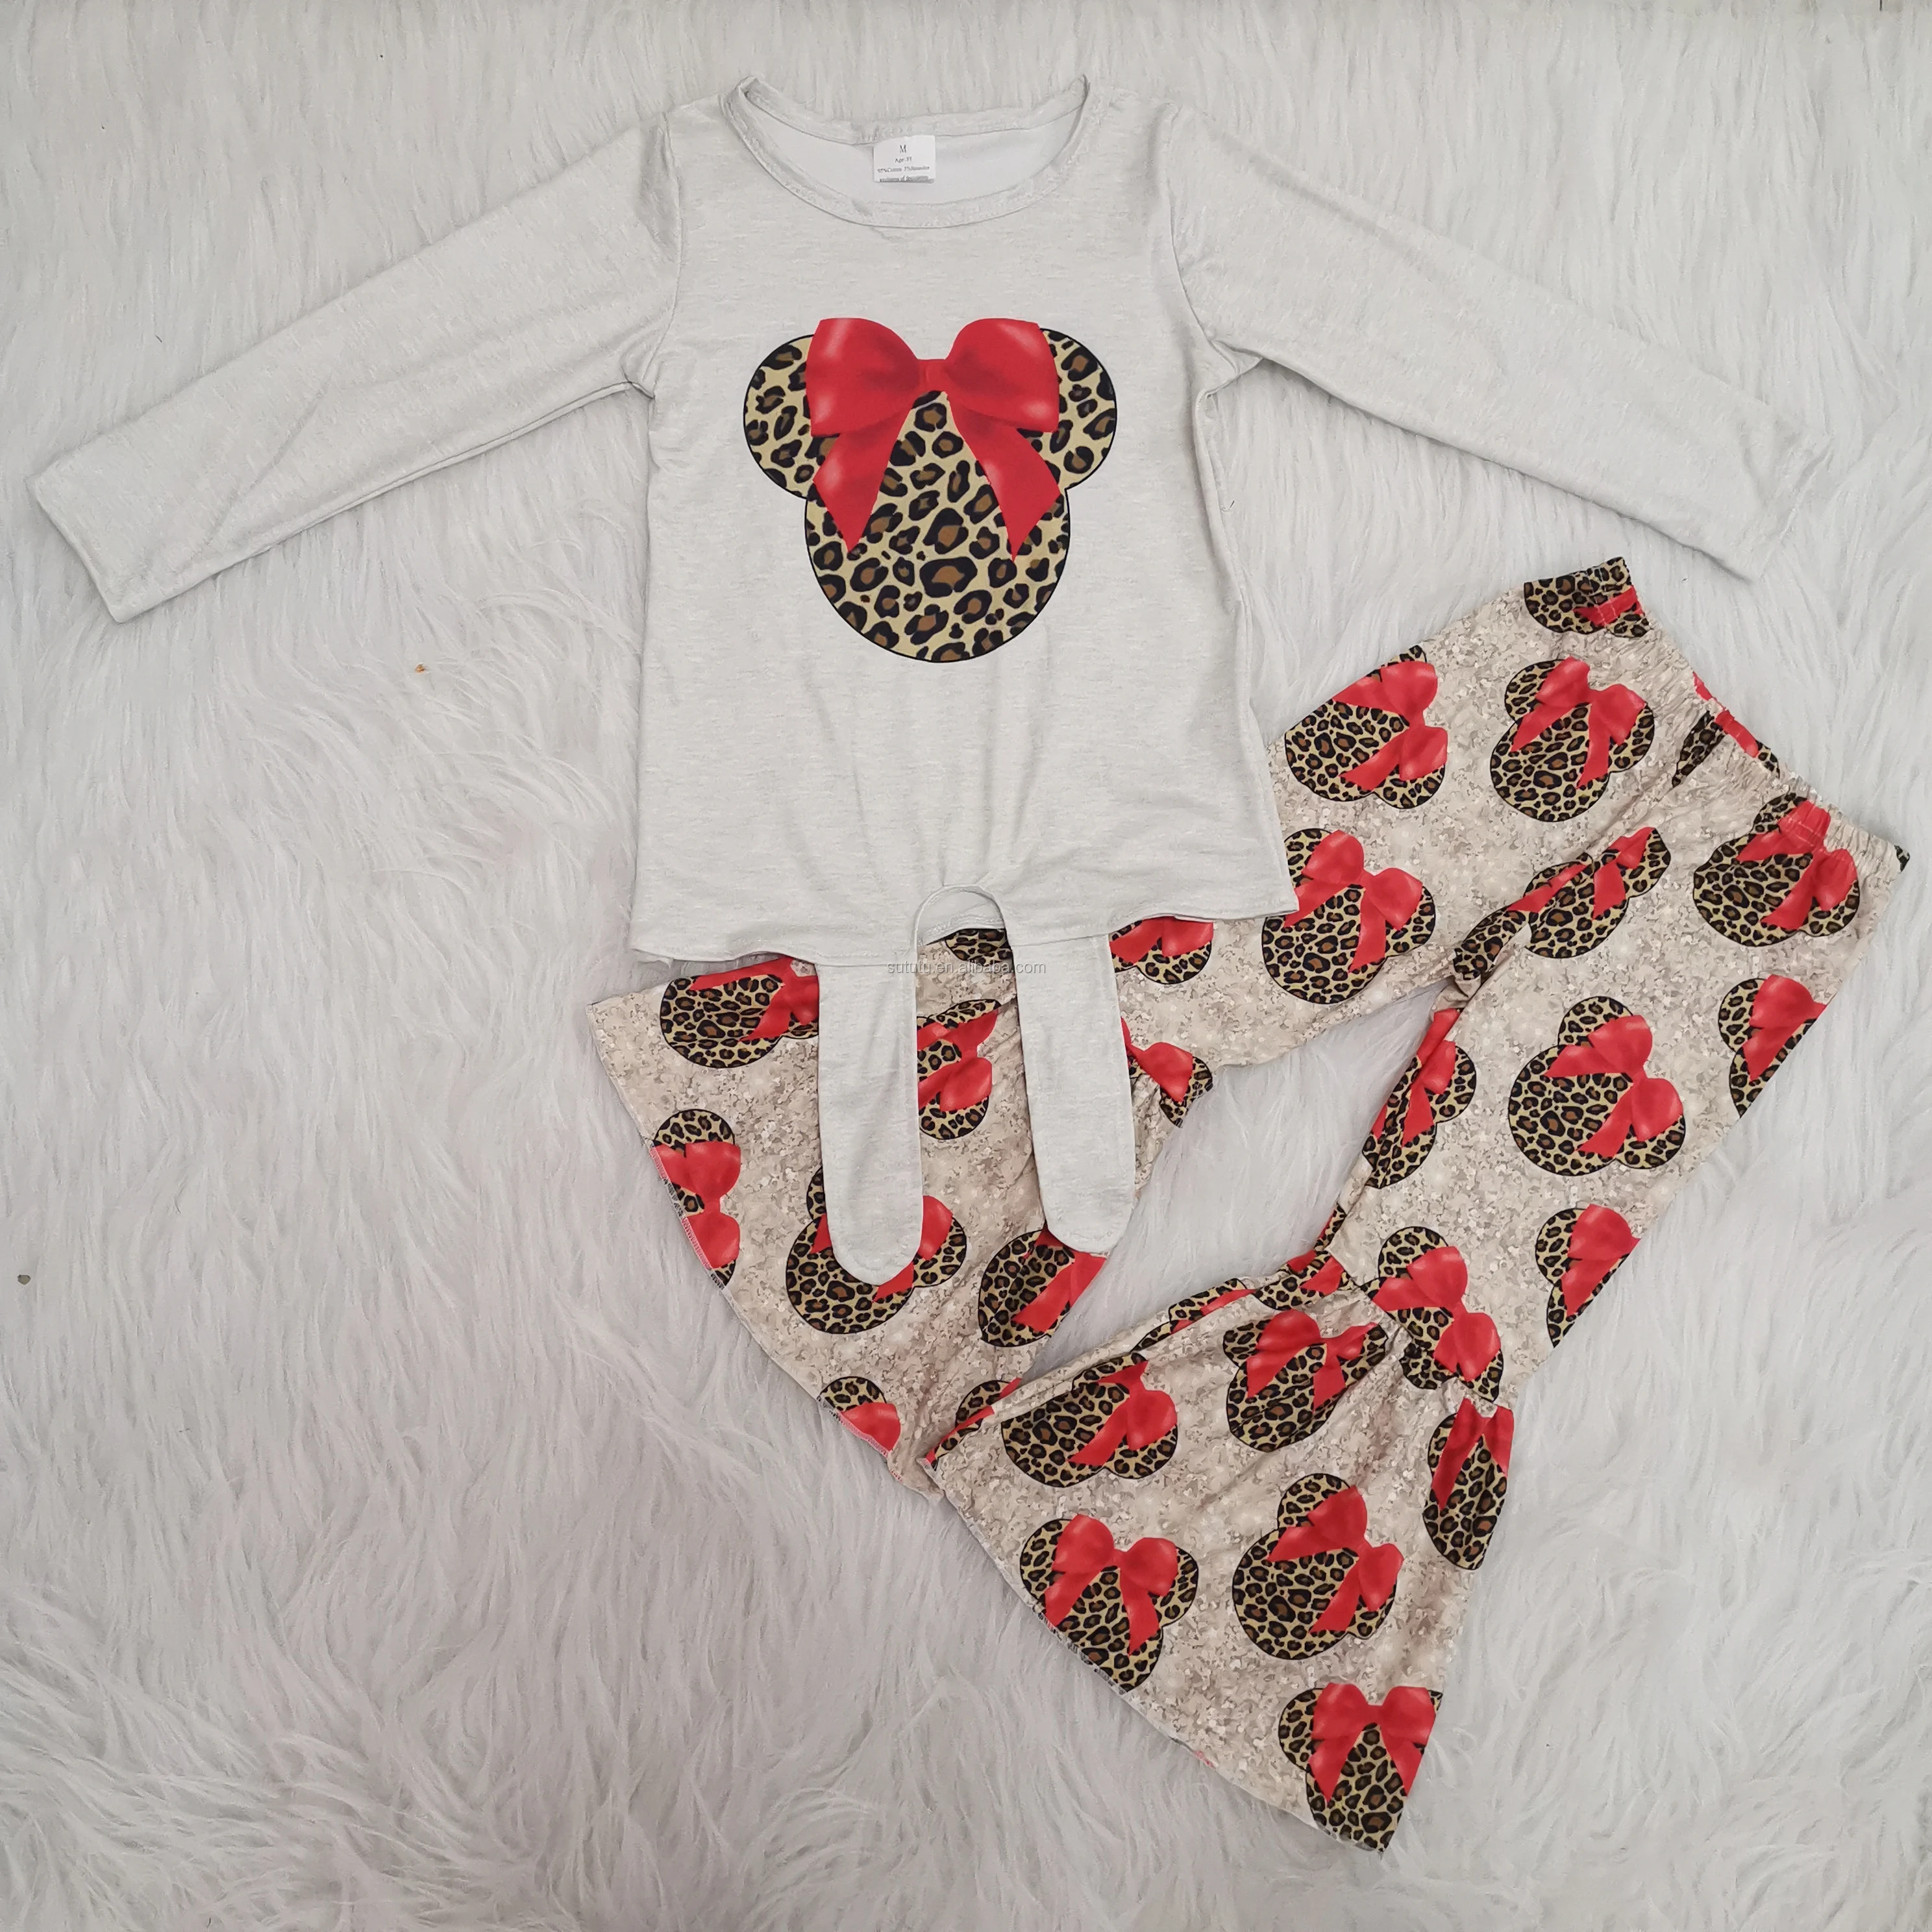 baby girl clothing boutiques online